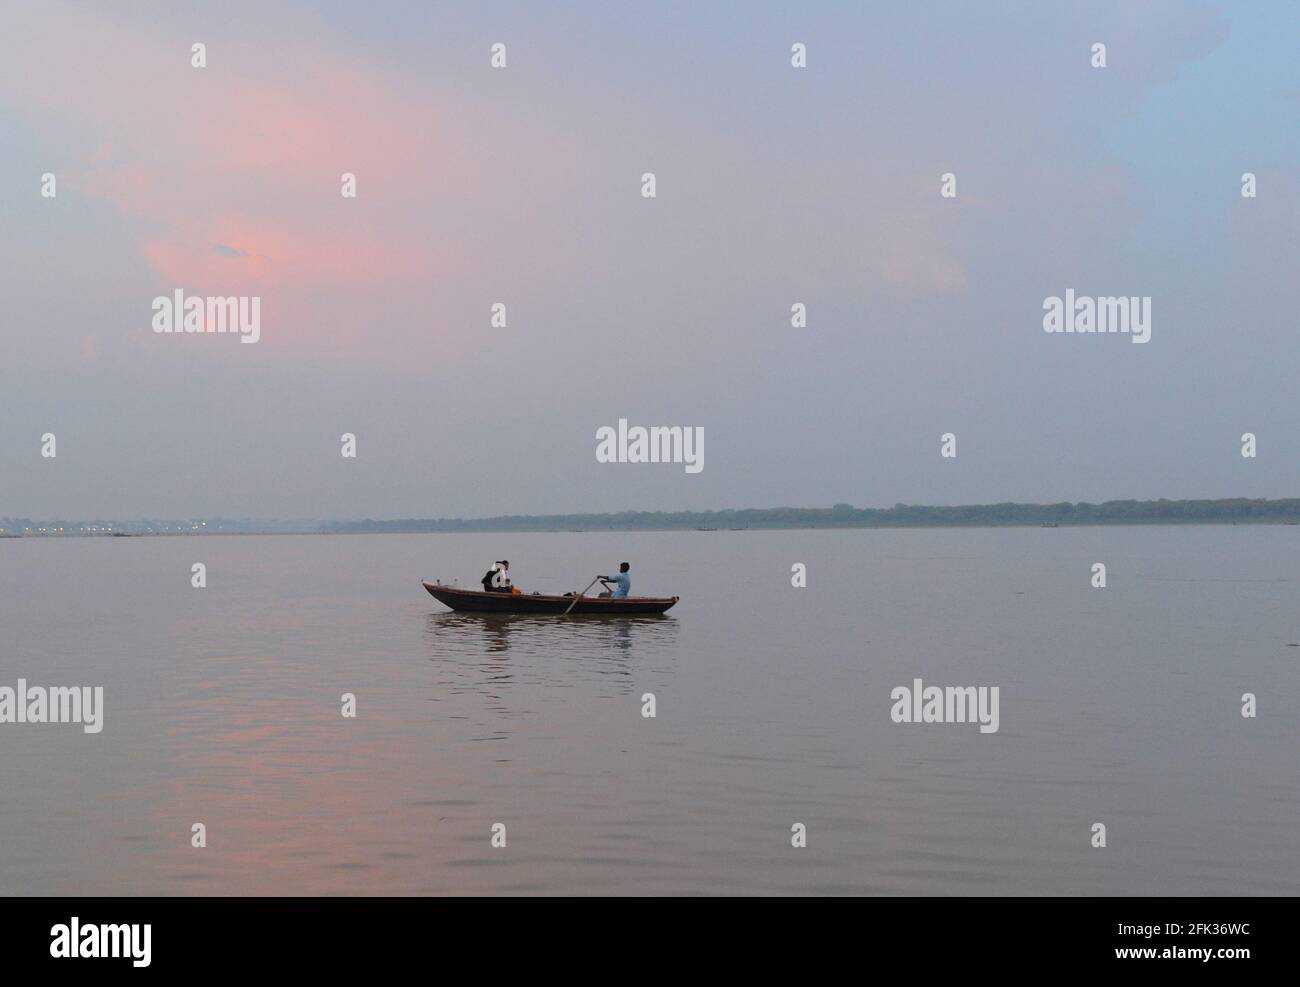 Pilgrims riding a boat on the Ganges river in Varanasi. Stock Photo